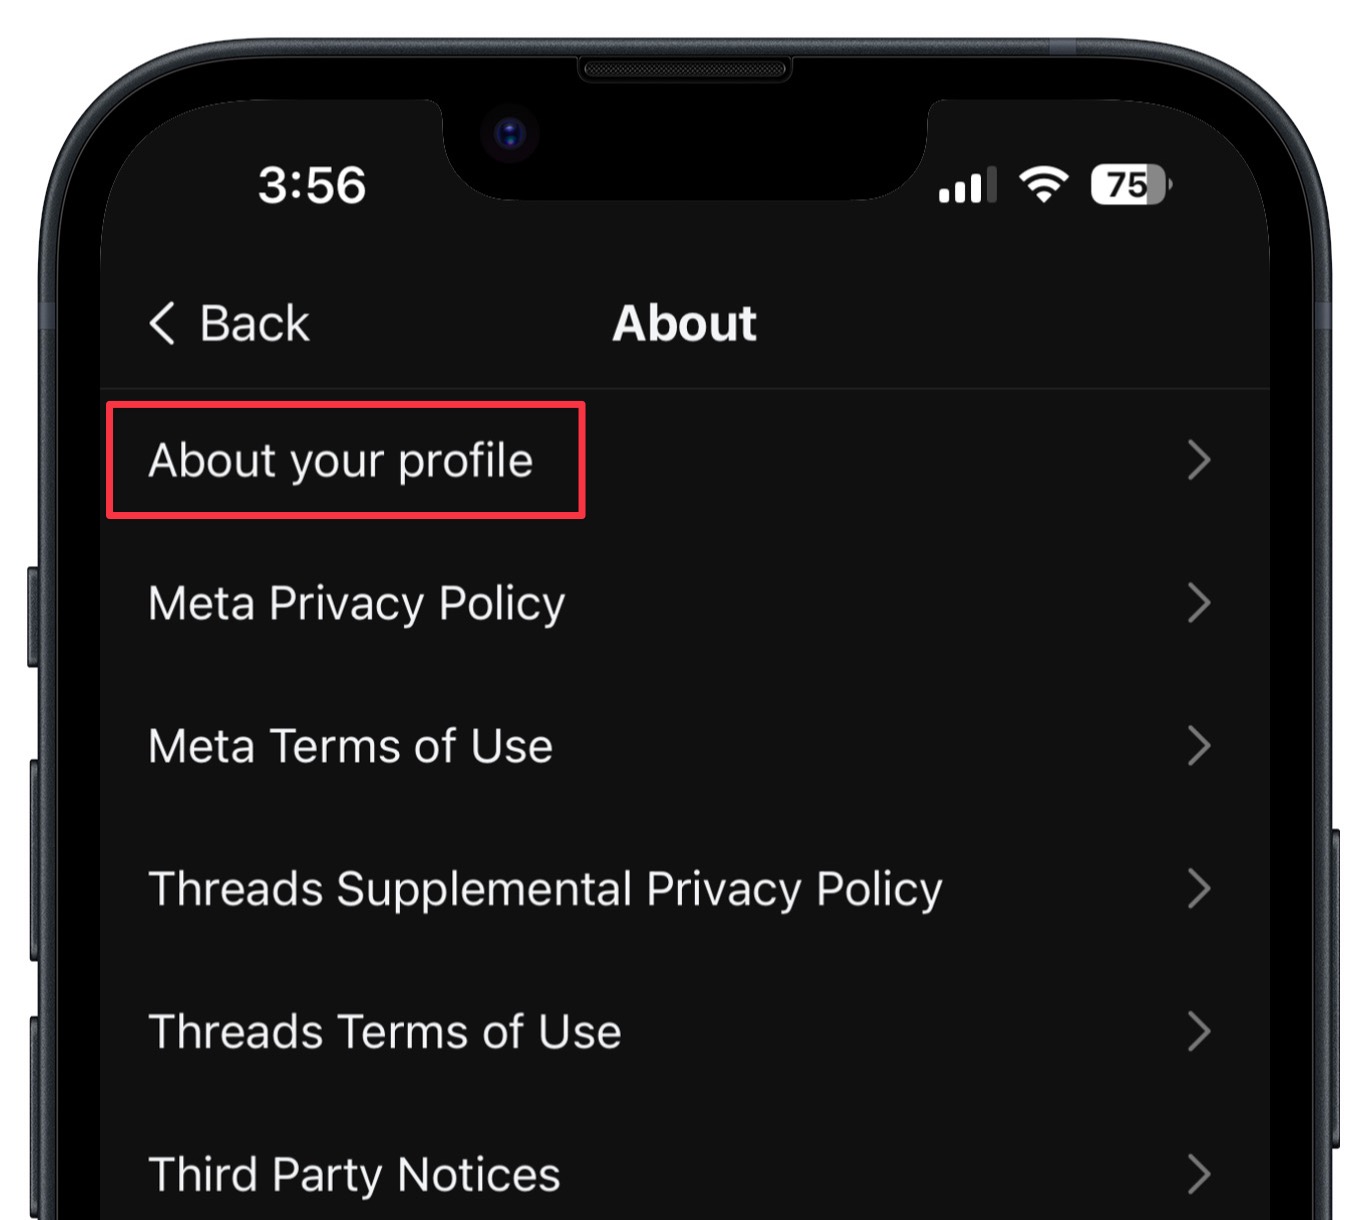 The About section in the Settings subsection of the Threads app, highlights the About this profile button.